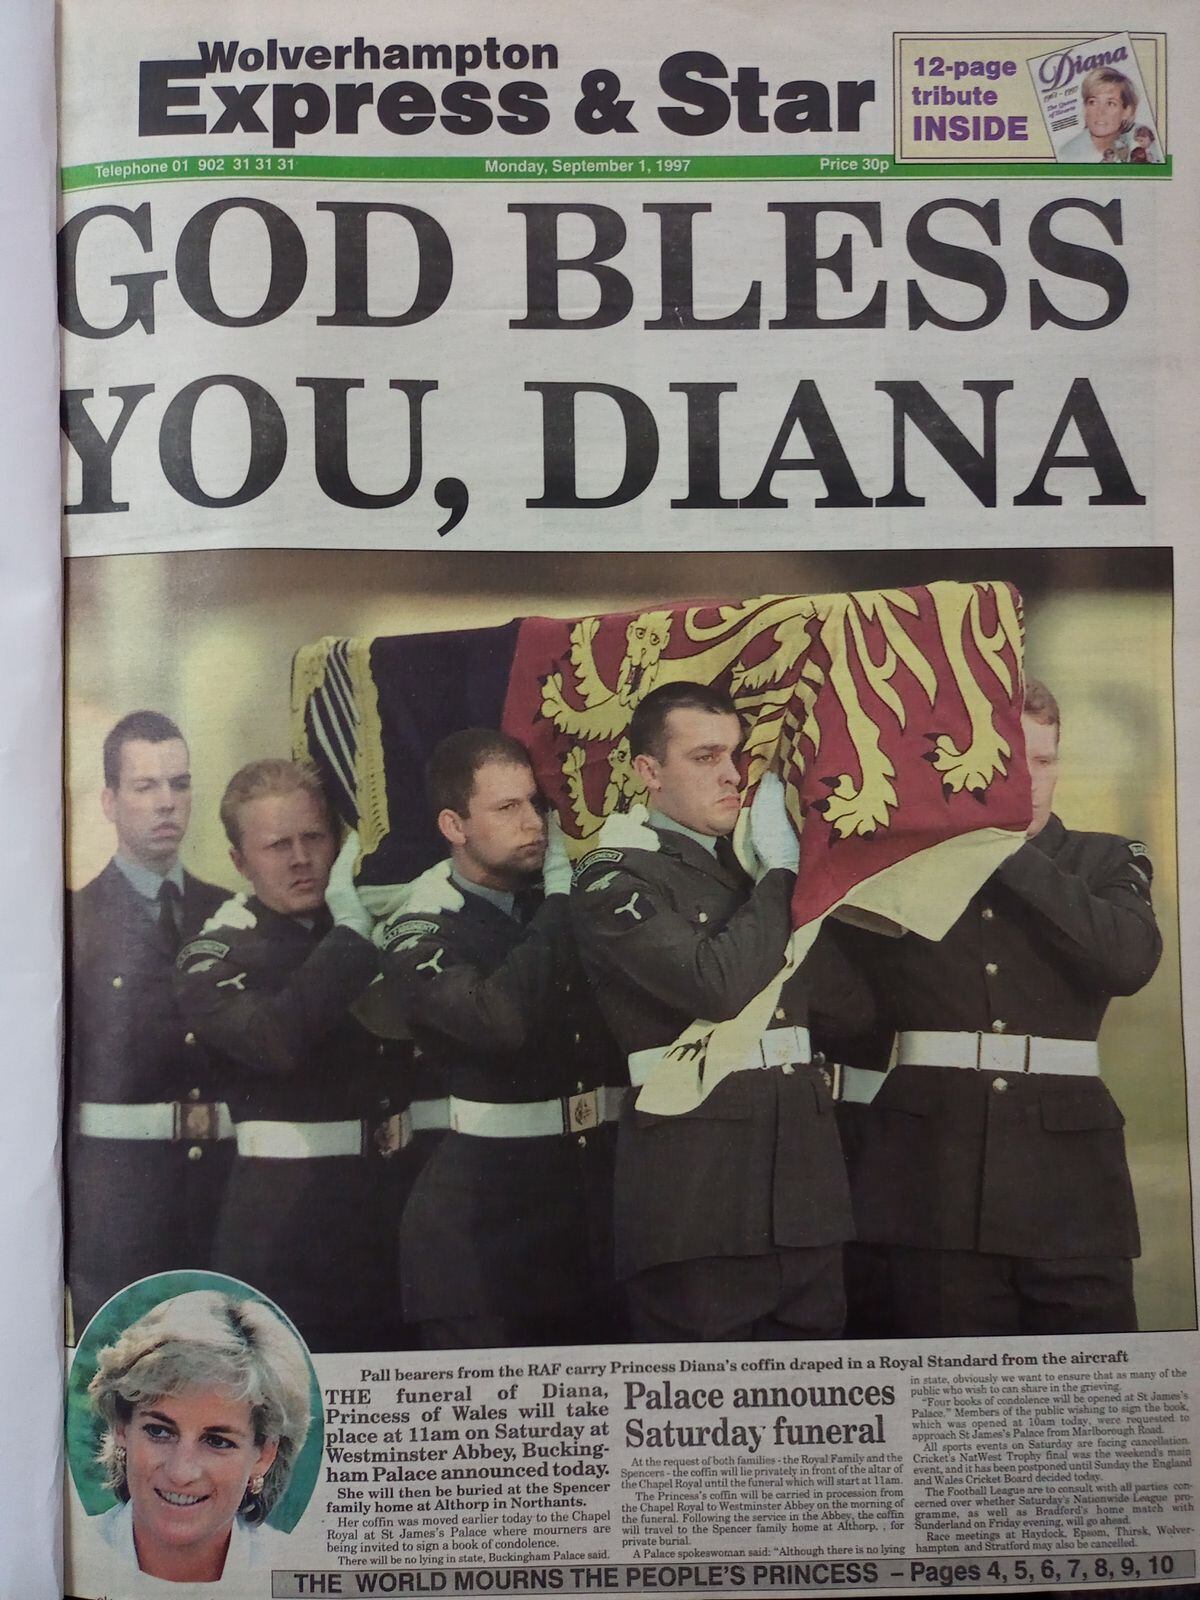 How the Express & Star reported Diana's death